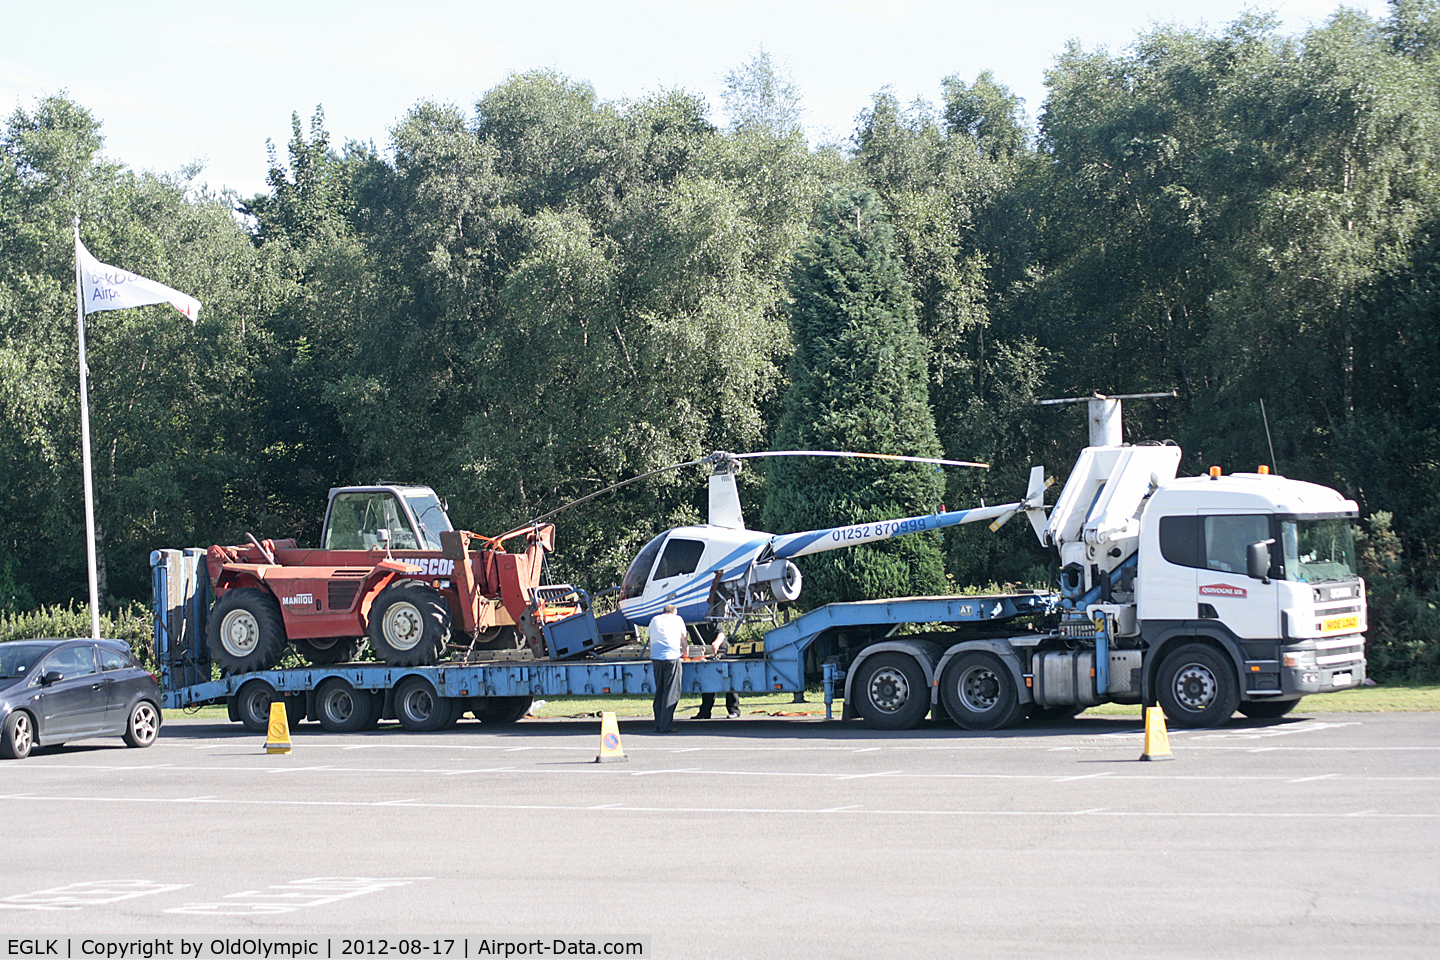 Blackbushe Airport, Camberley, England United Kingdom (EGLK) - Removal of R22 display exhibit from airport entrance